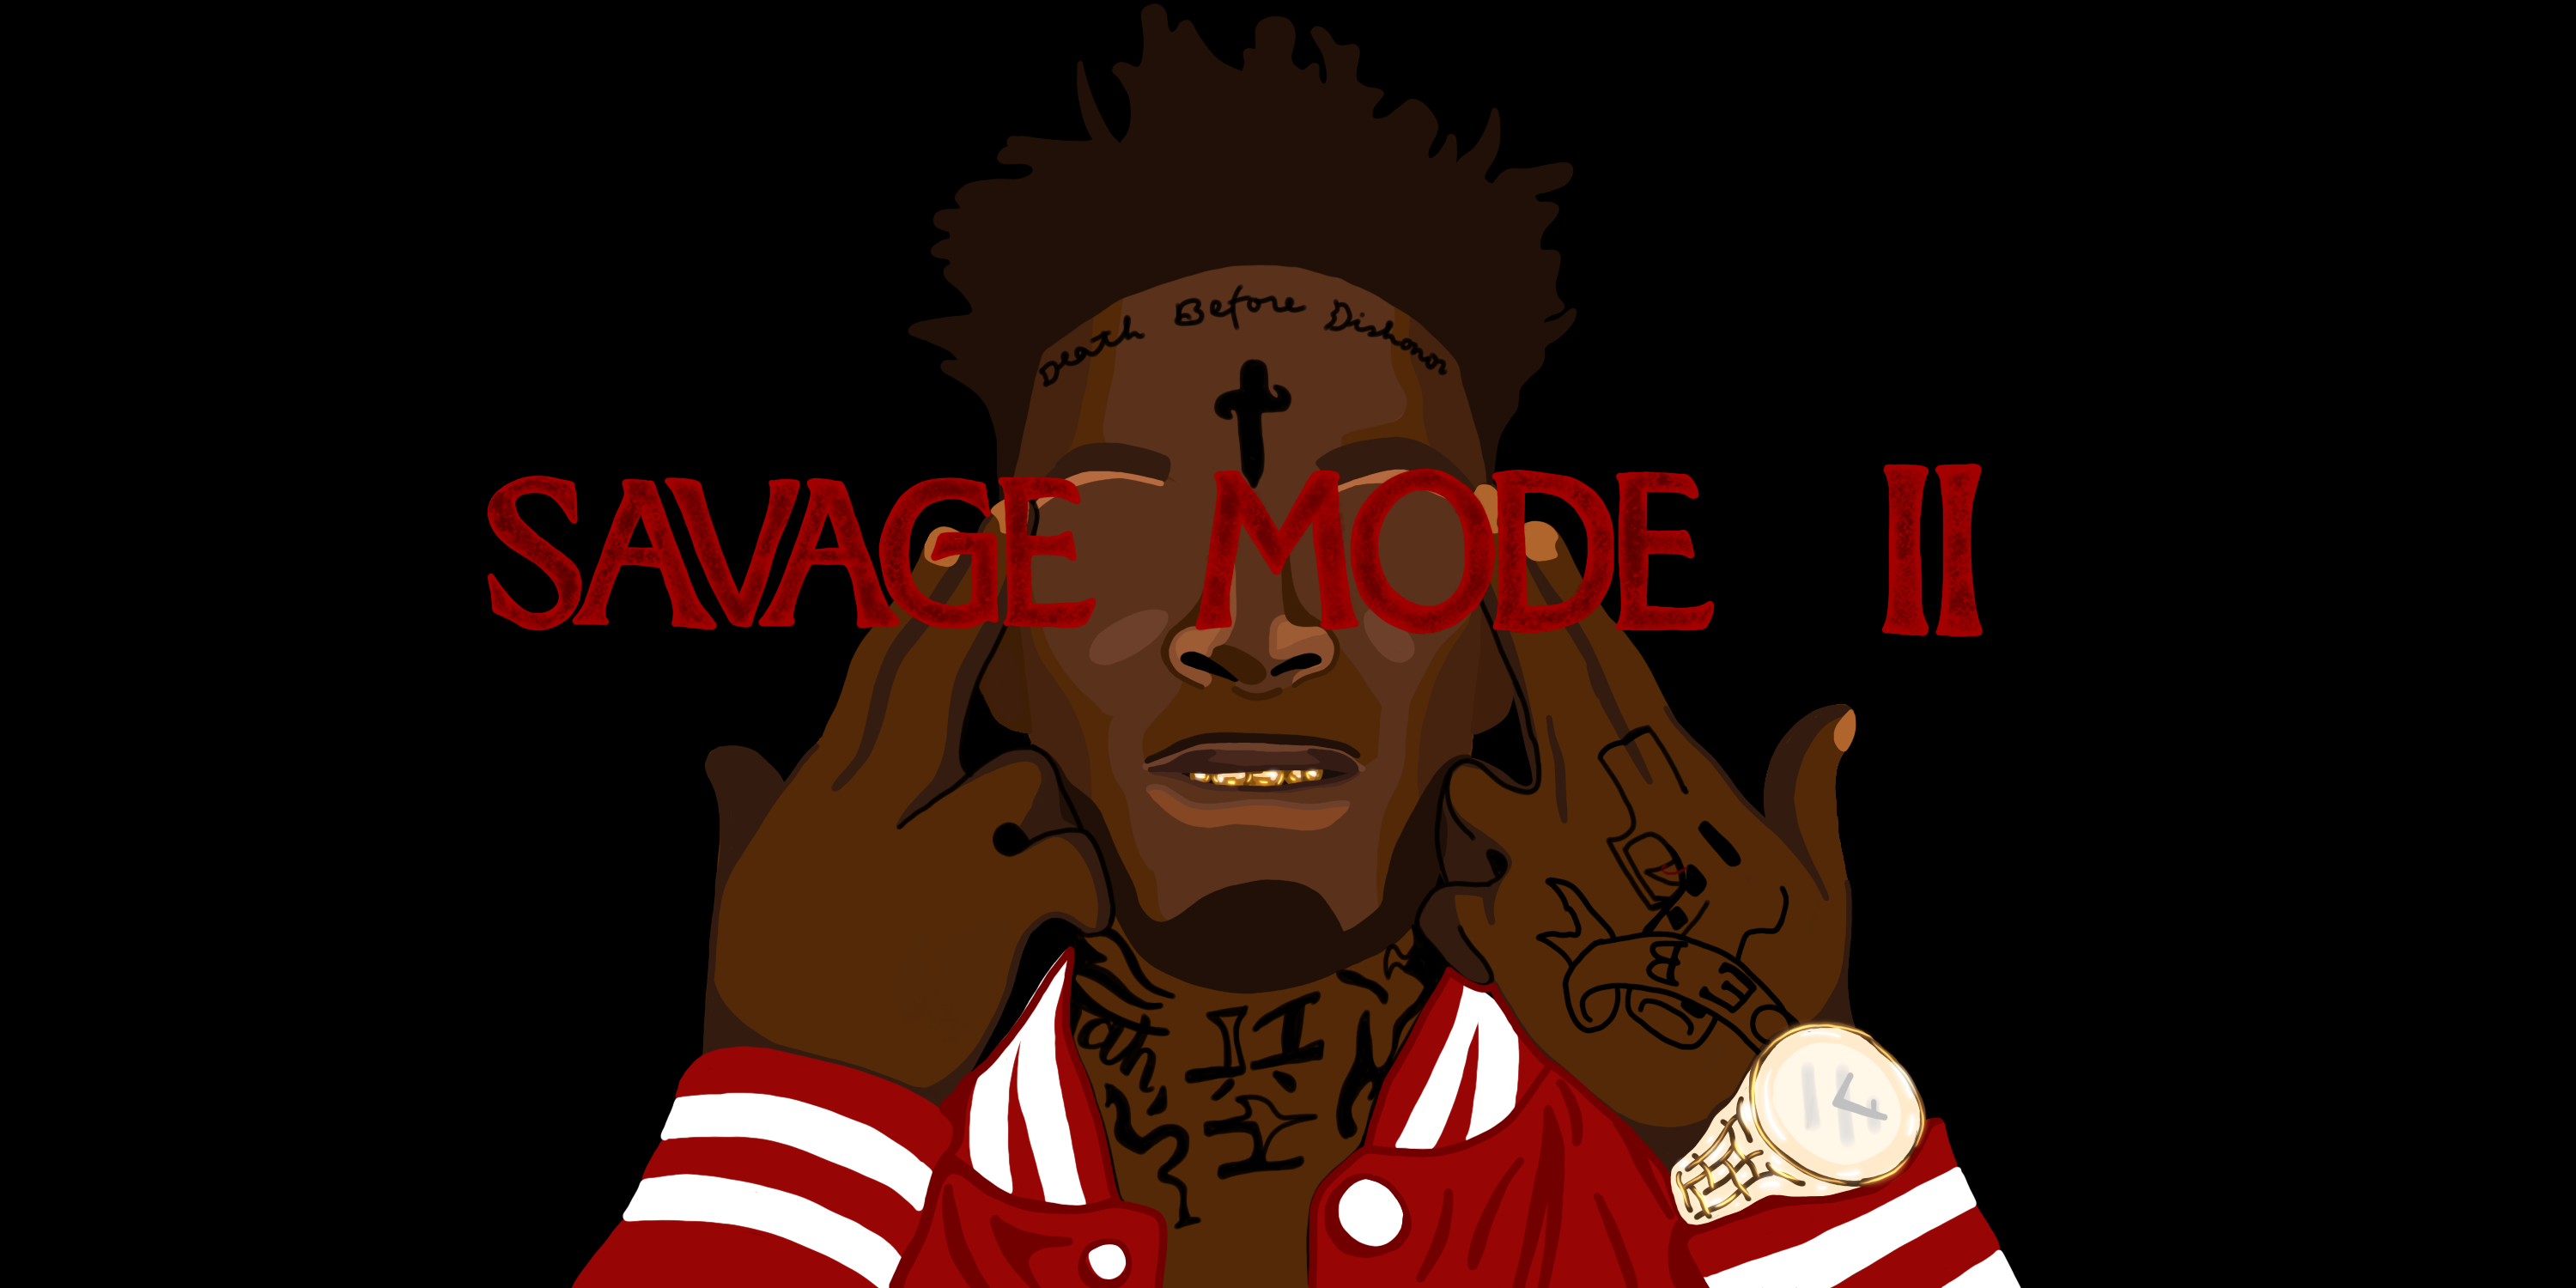 21 Savage & Metro Boomin - Savage Mode II! After two extra months